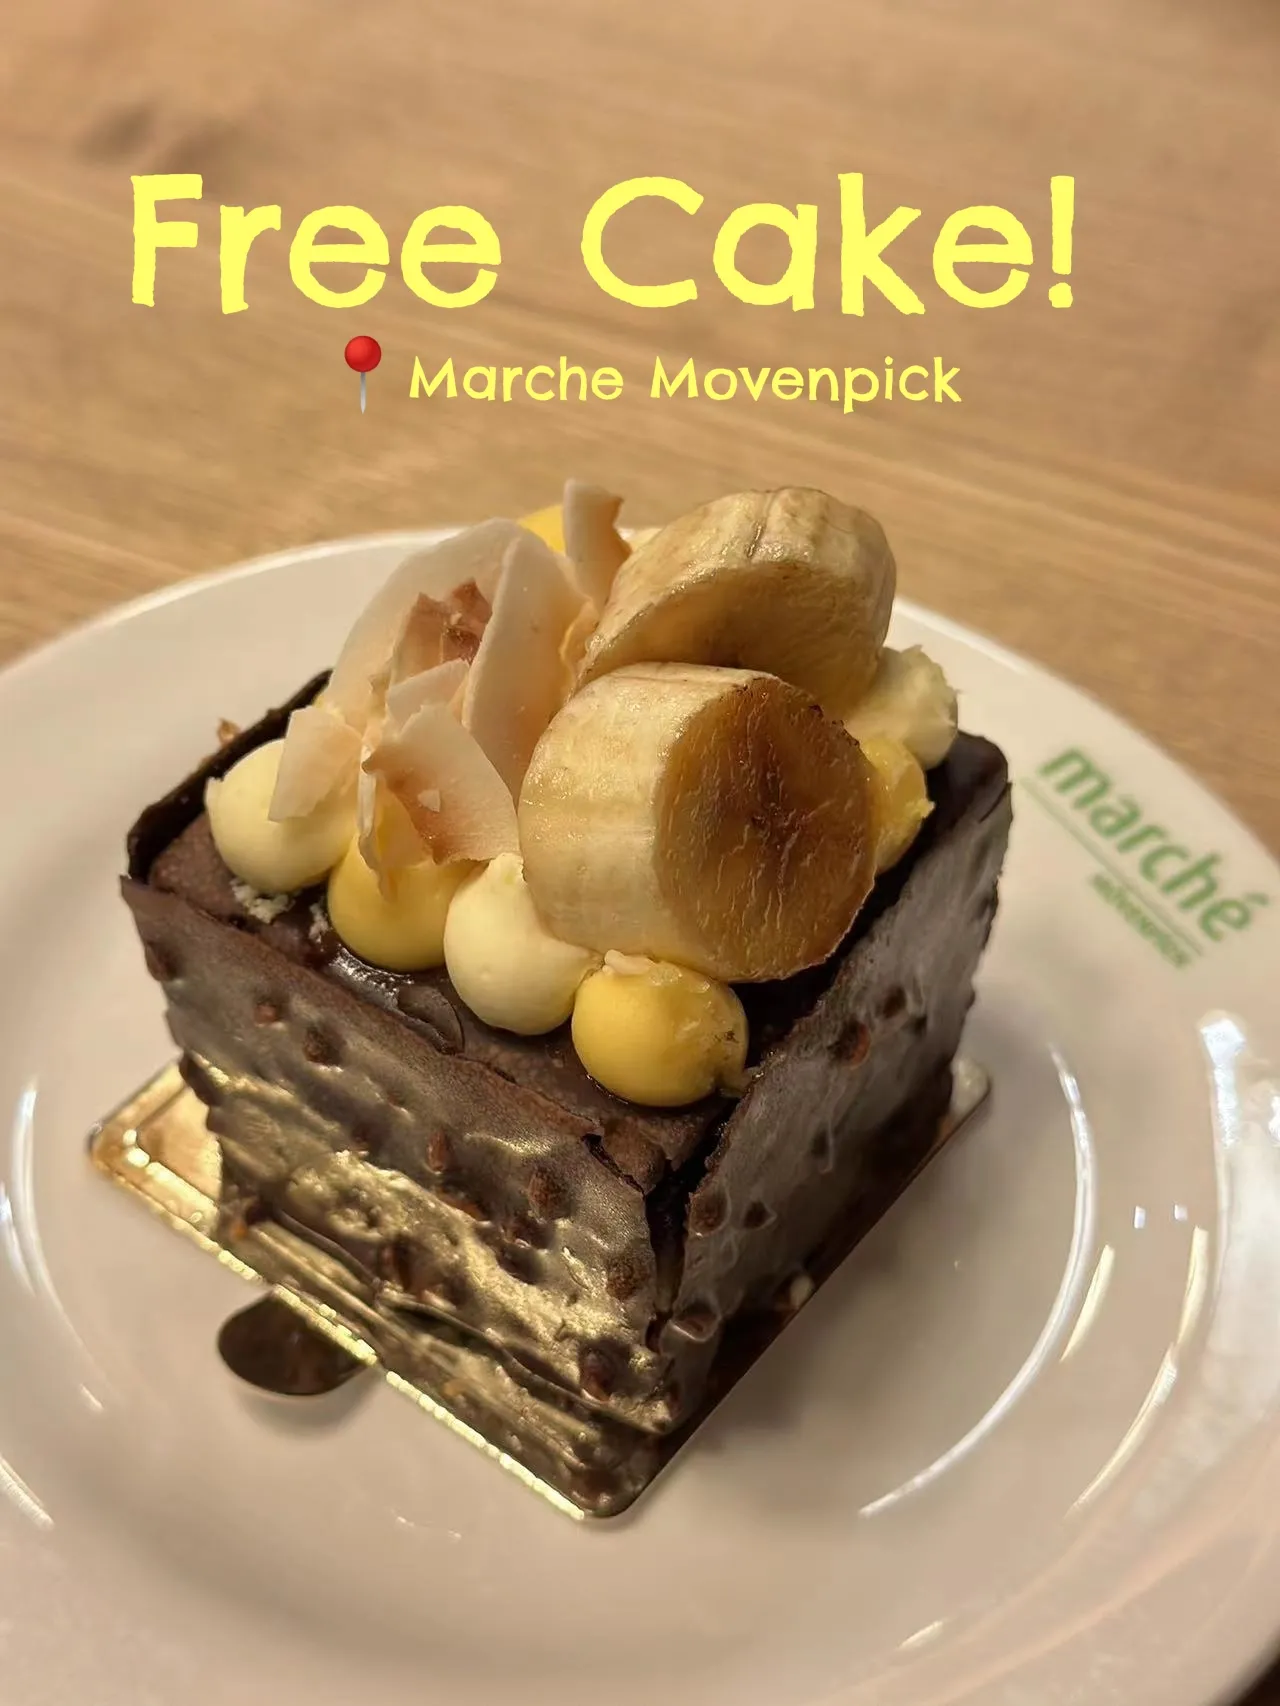 Birthday deals: Free cake without any purchase! 's images(0)